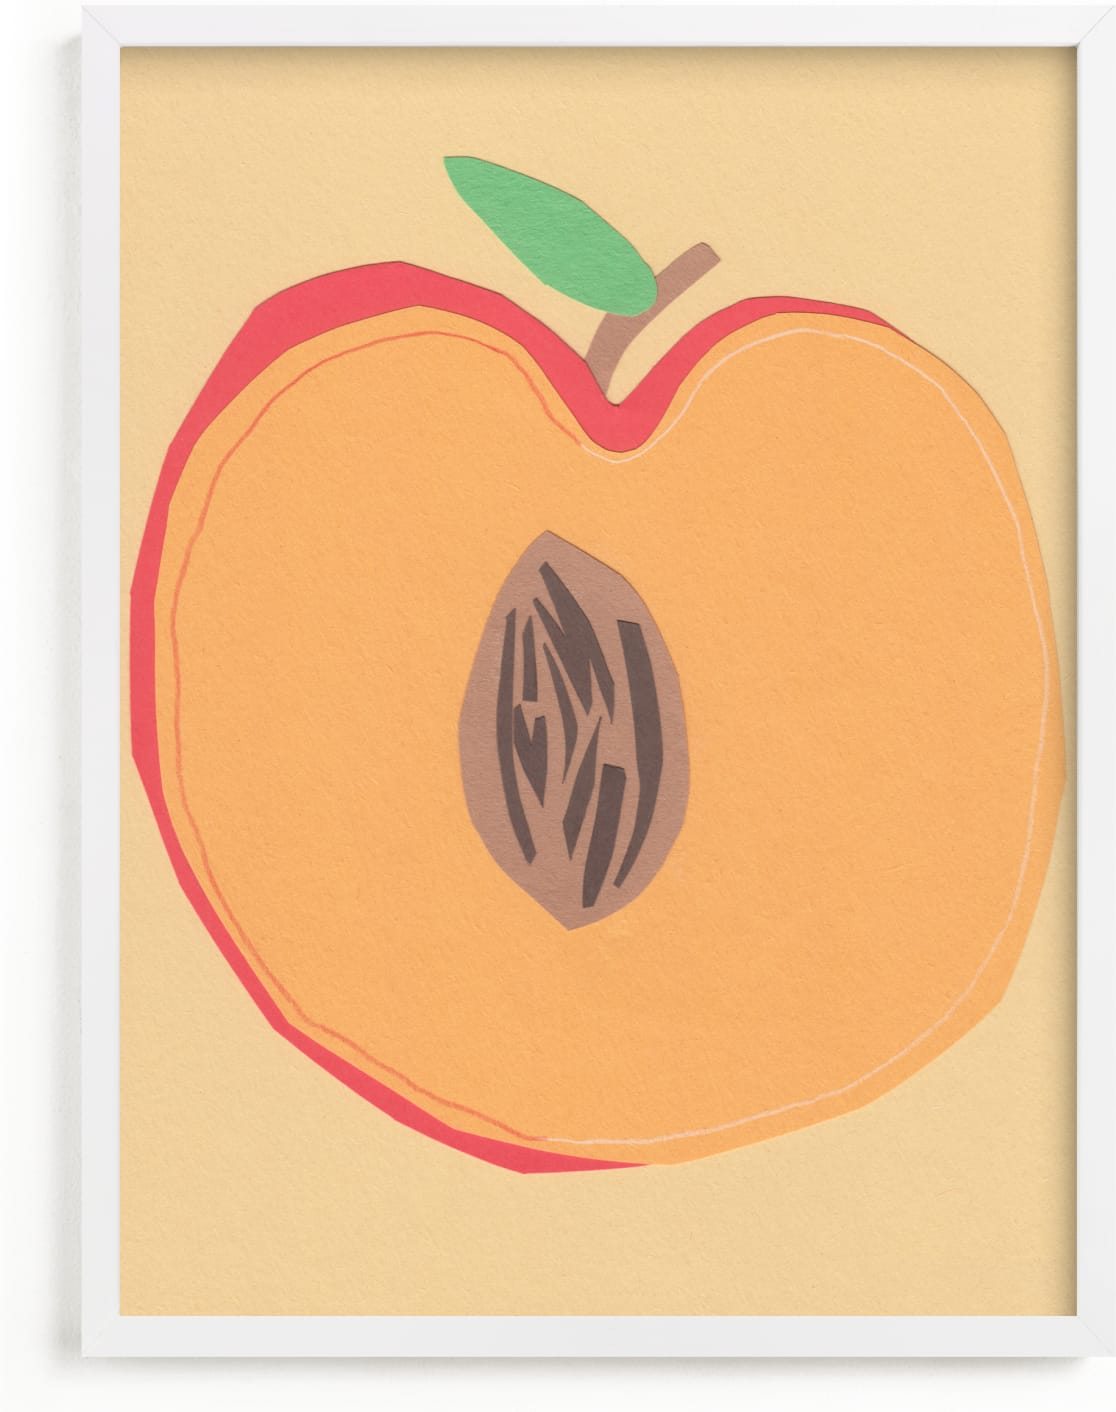 This is a beige art by Elliot Stokes called Peach Pit.